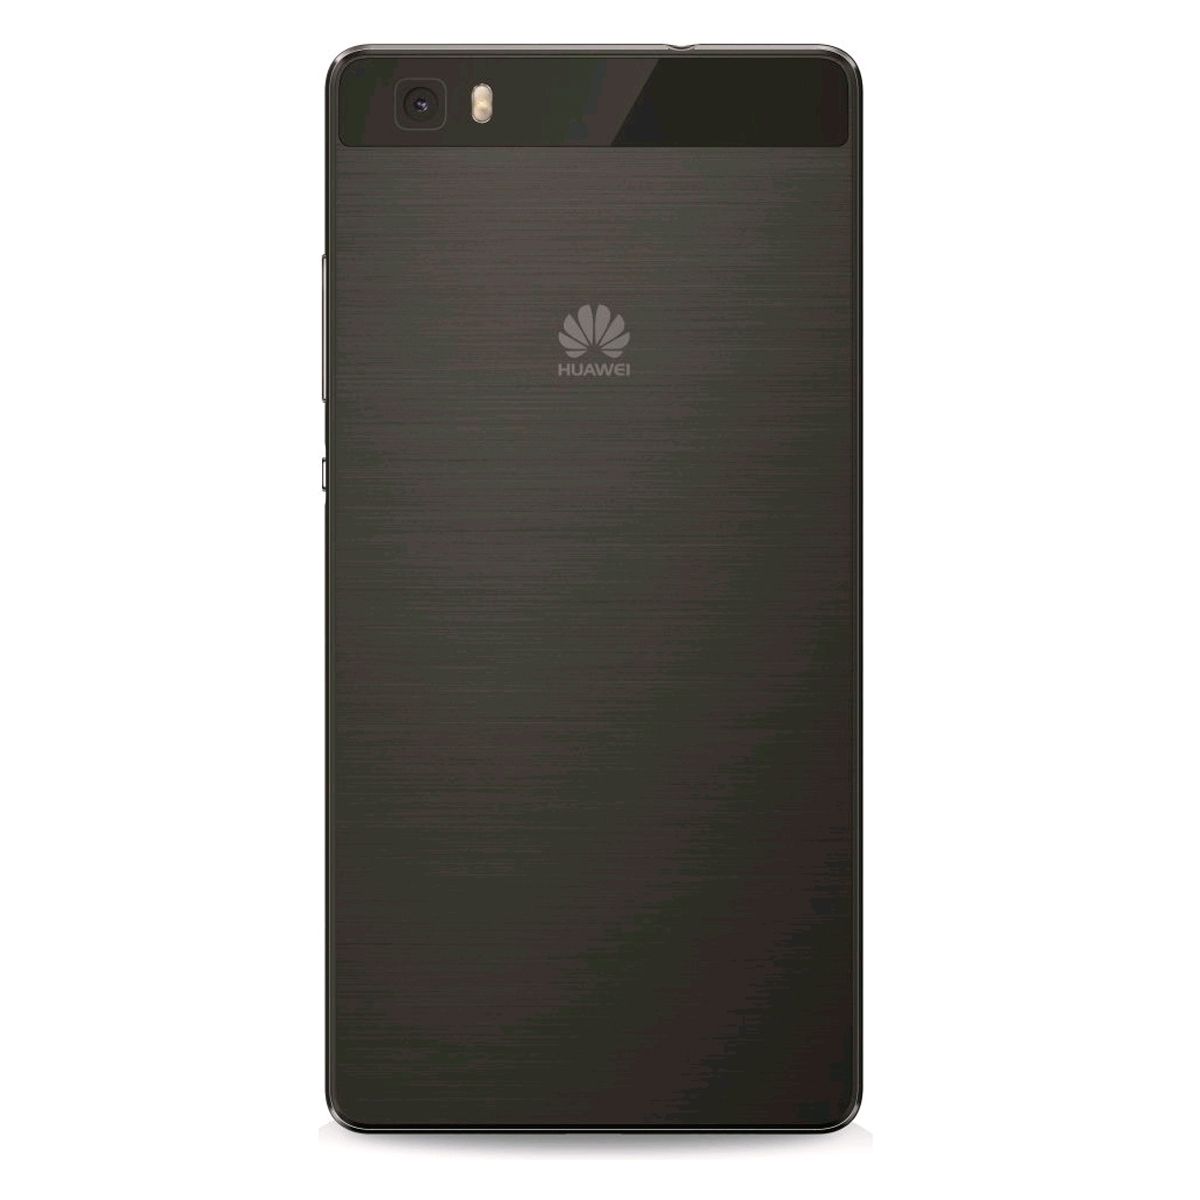 "Huawei P8 high version" specifications | detailed parameters